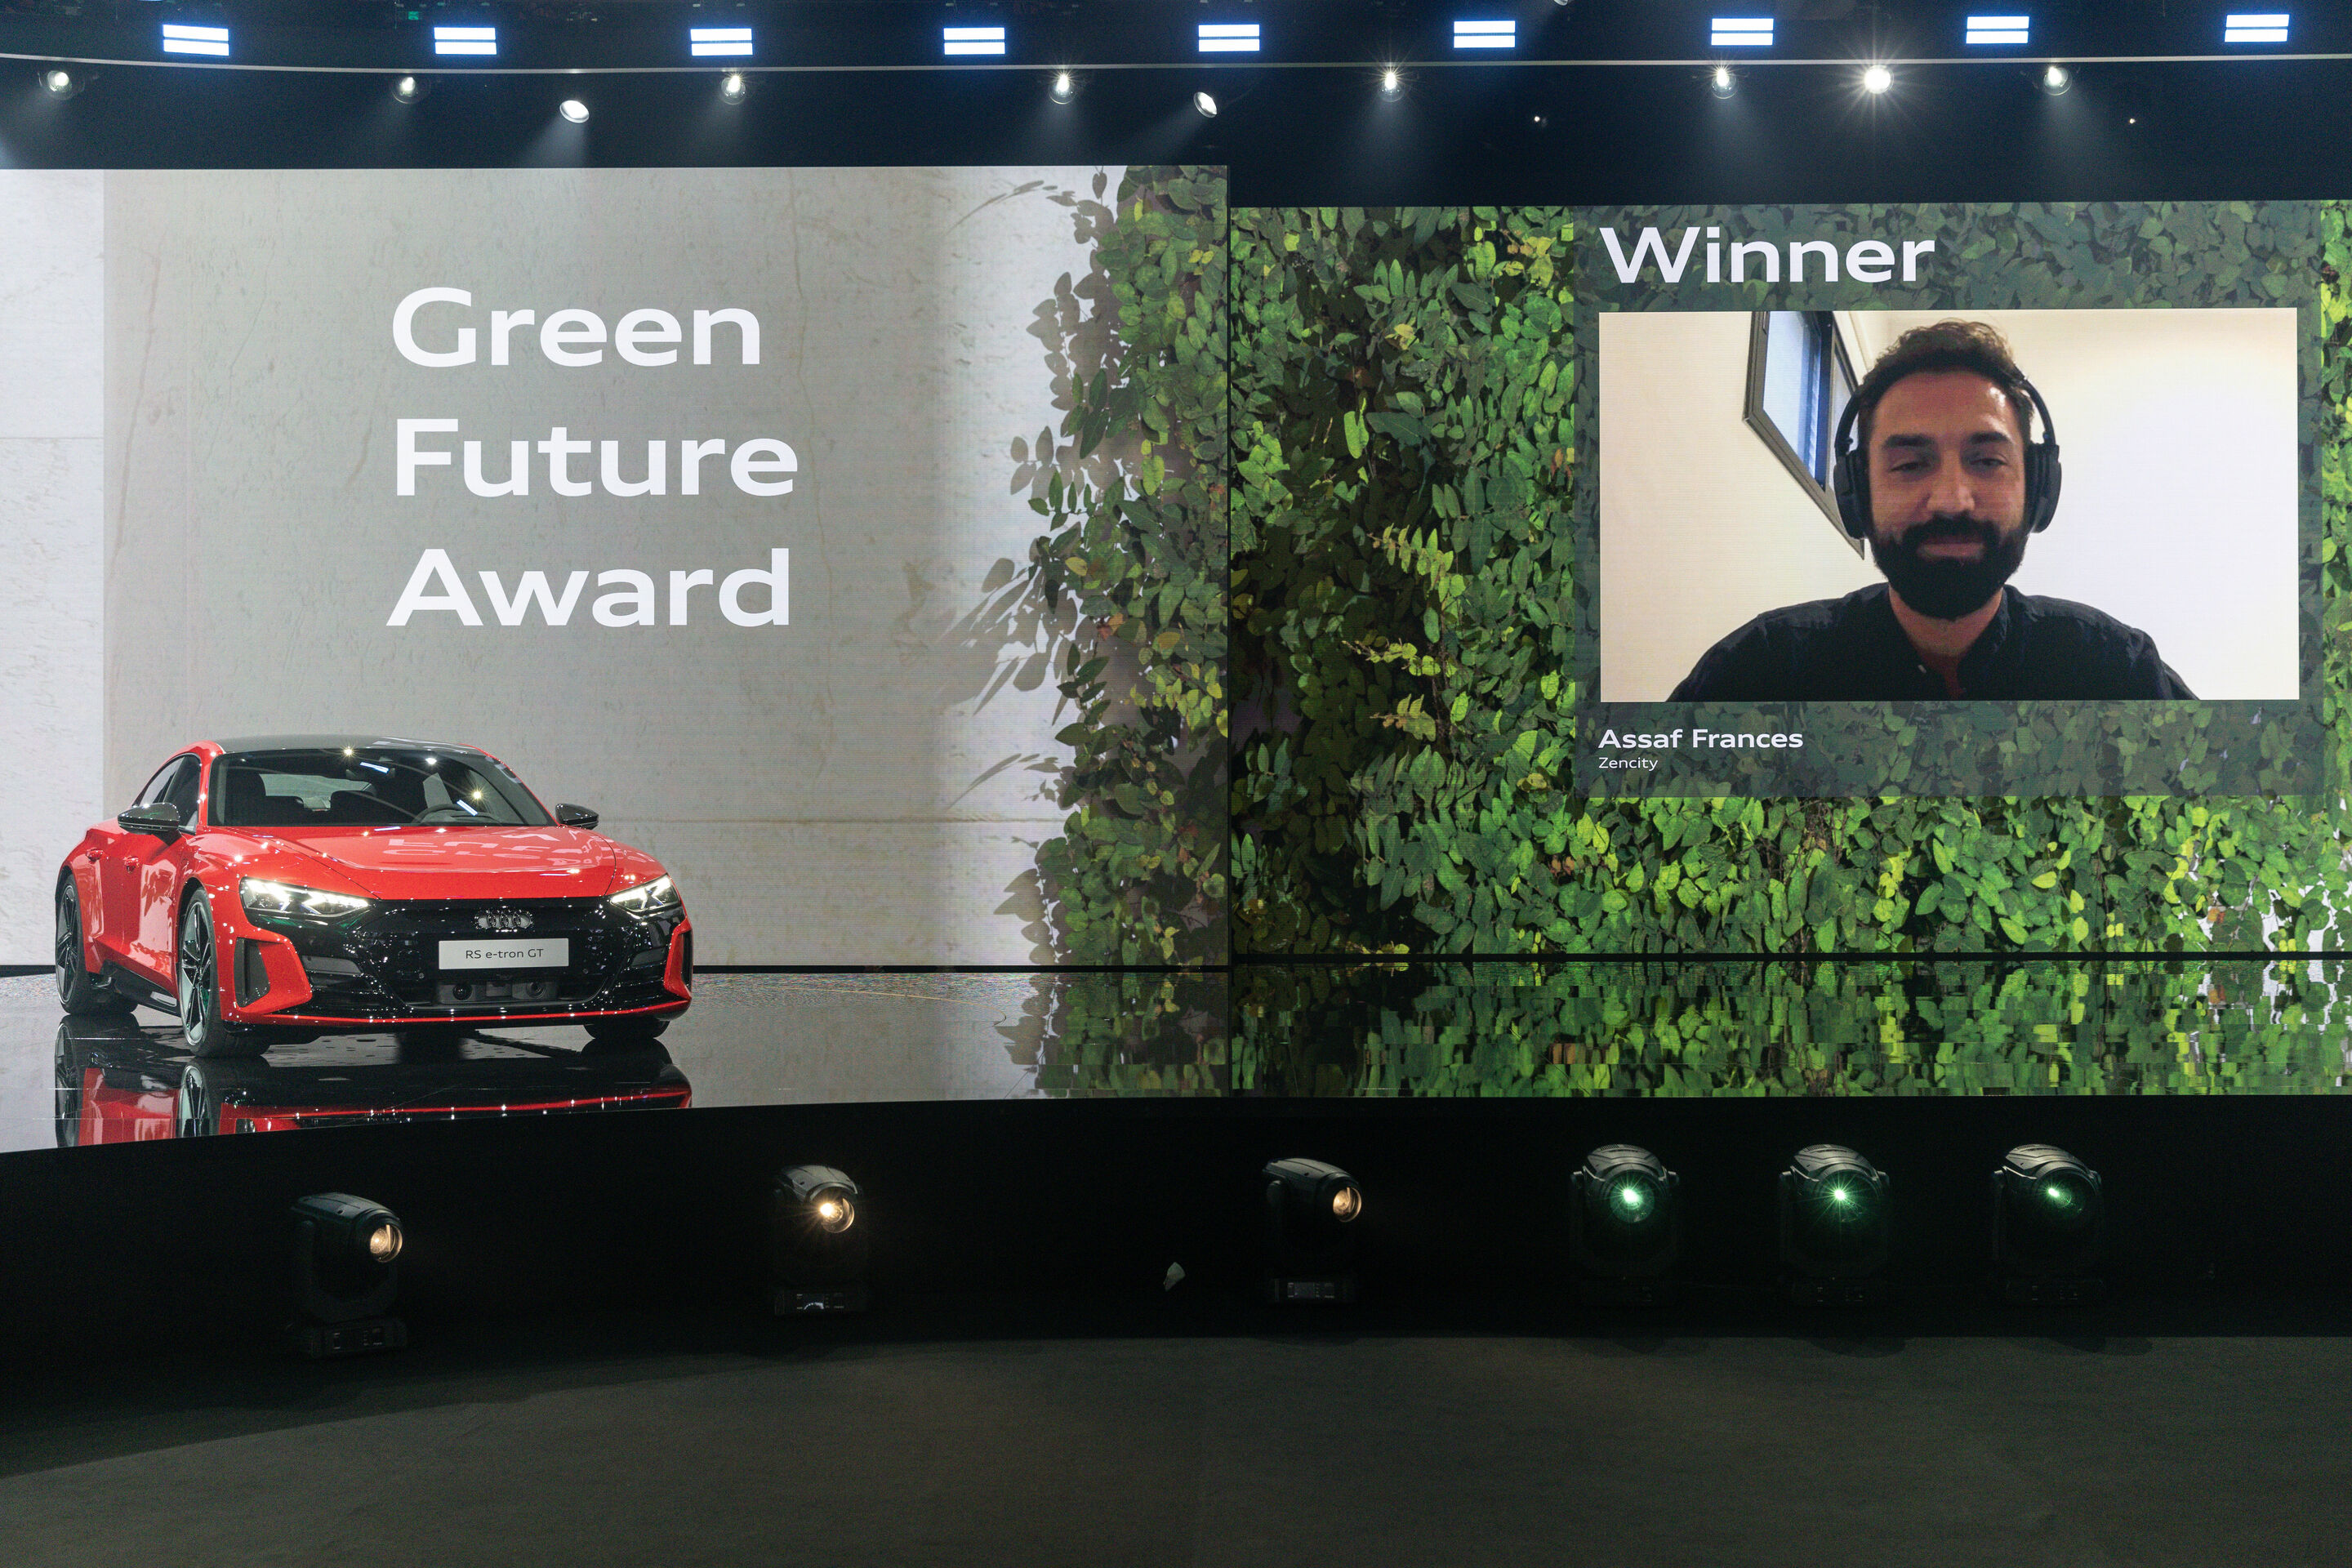 Artificial intelligence for greater sustainability and quality of life in cities: GREENTECH FESTIVAL and Audi give GREEN FUTURE Award to Zencity